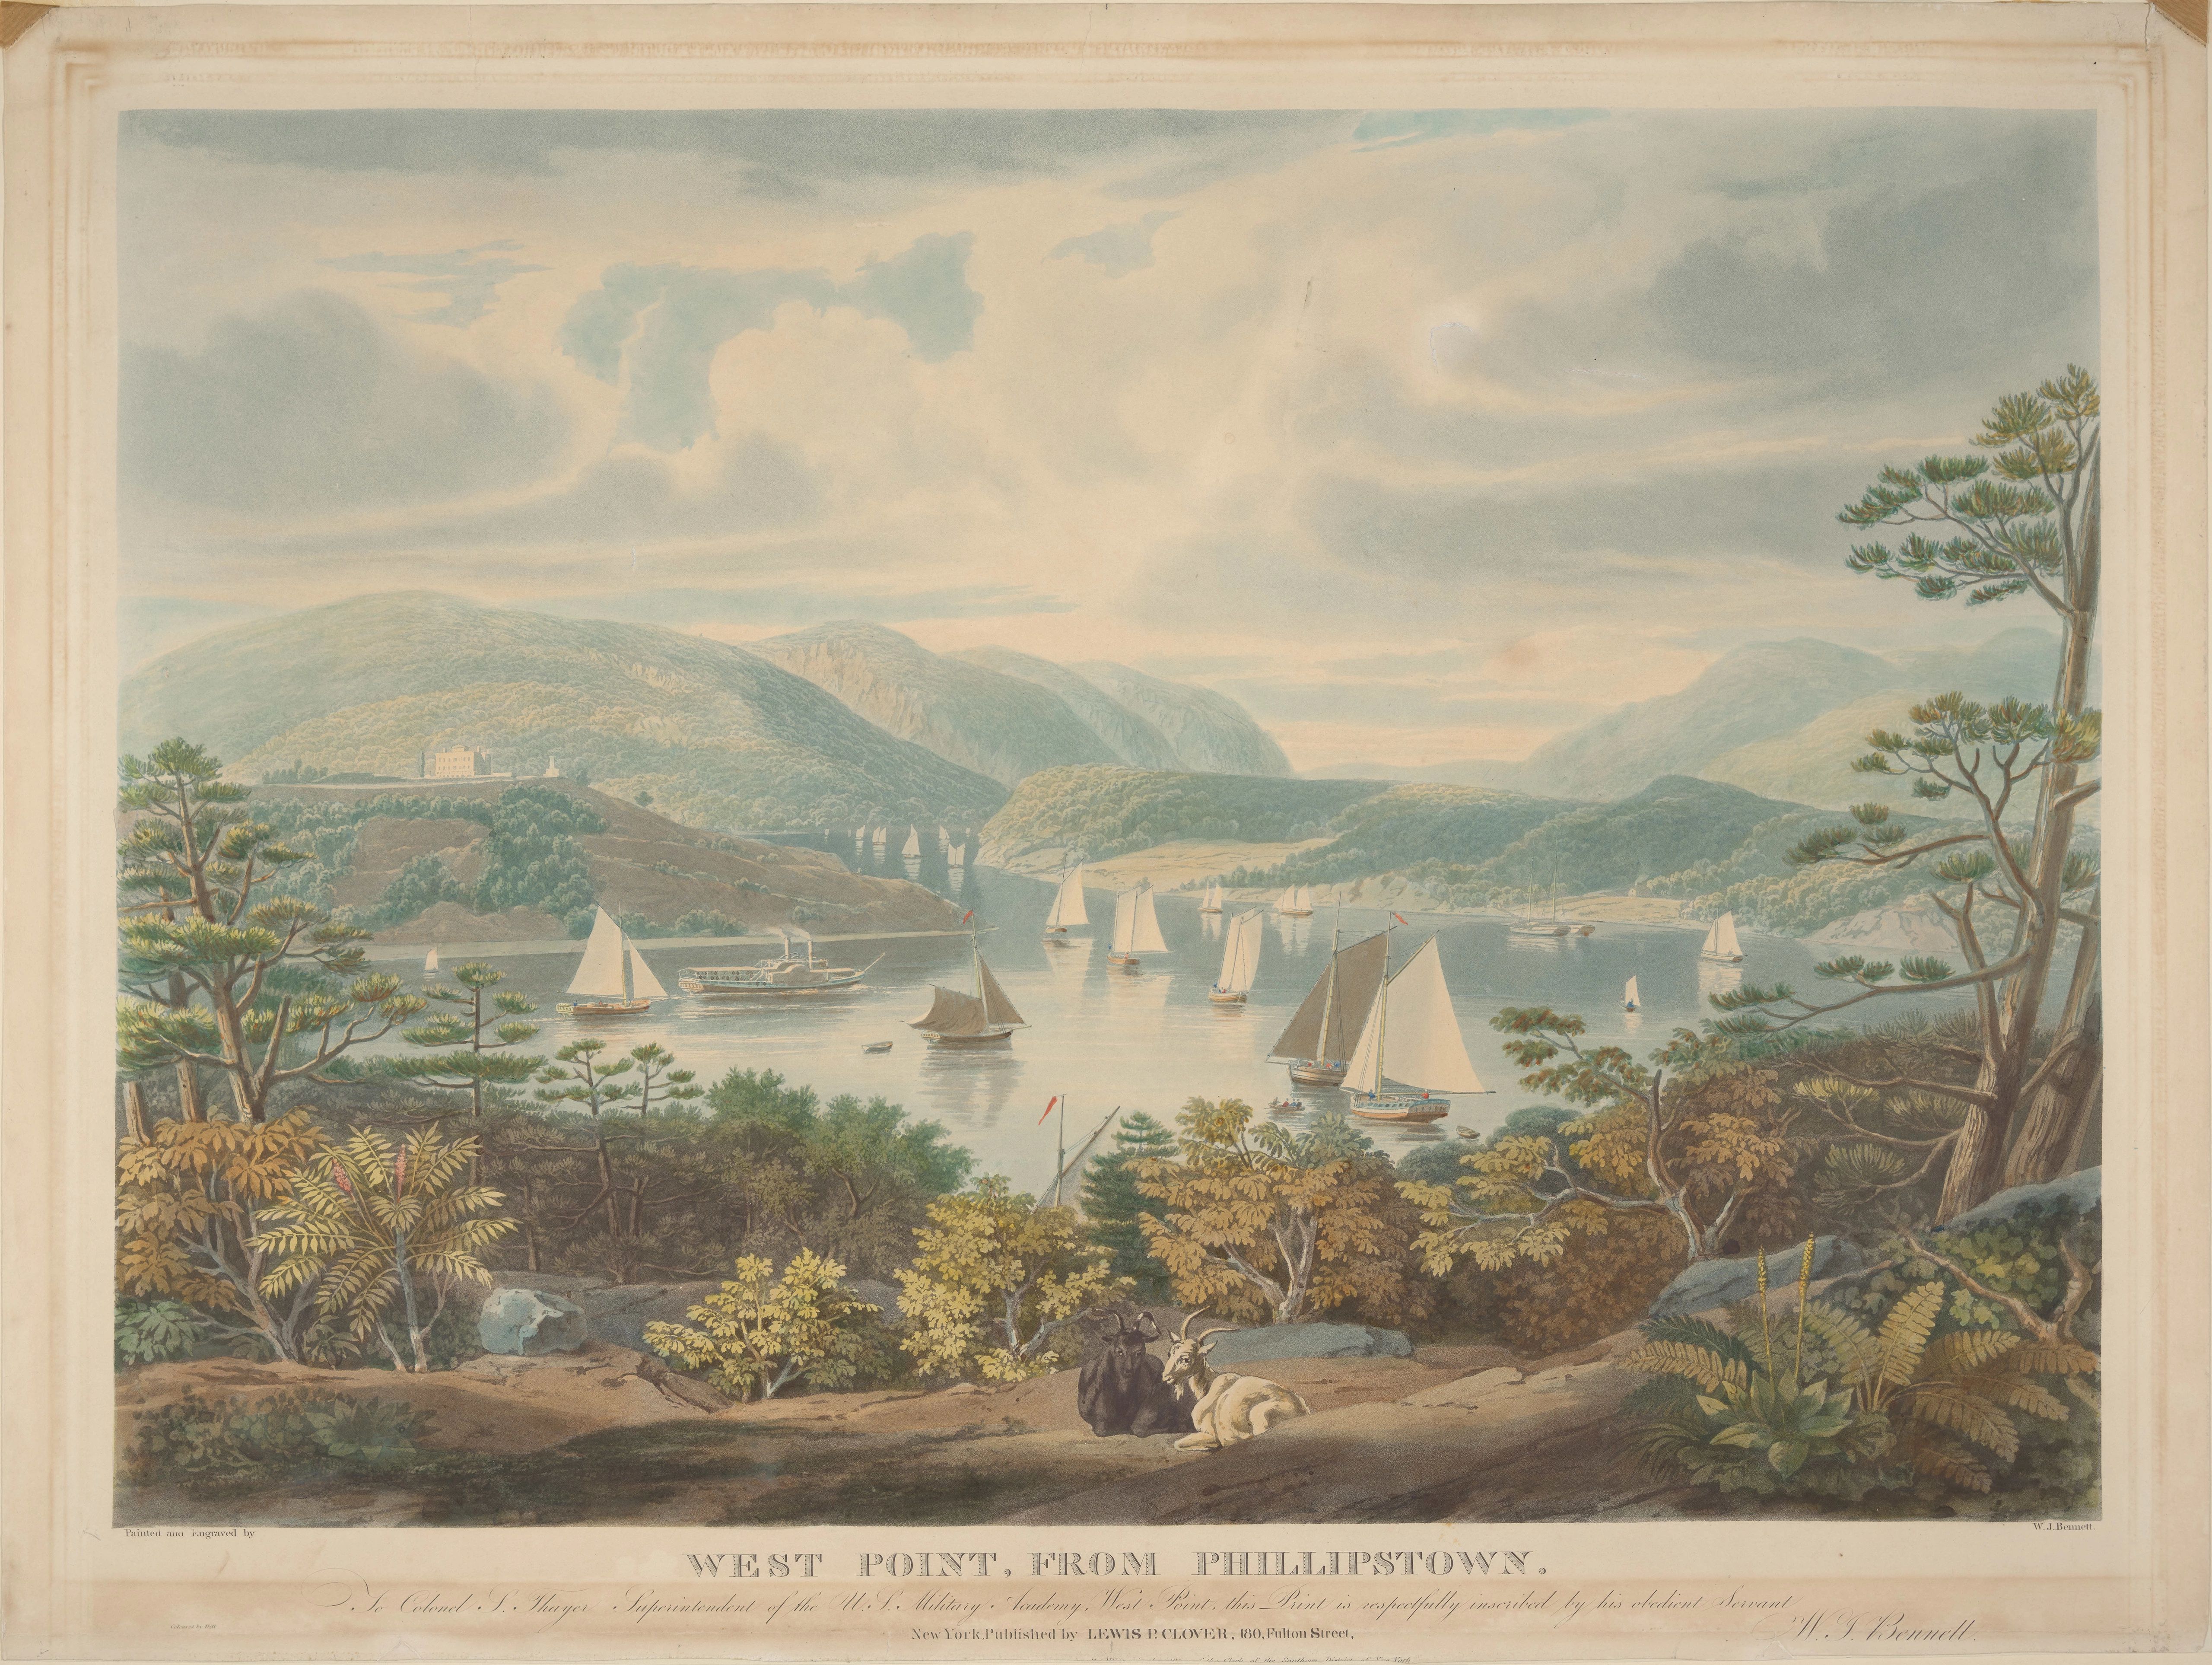 West Point from Phillipstown, Colored Aquatint.